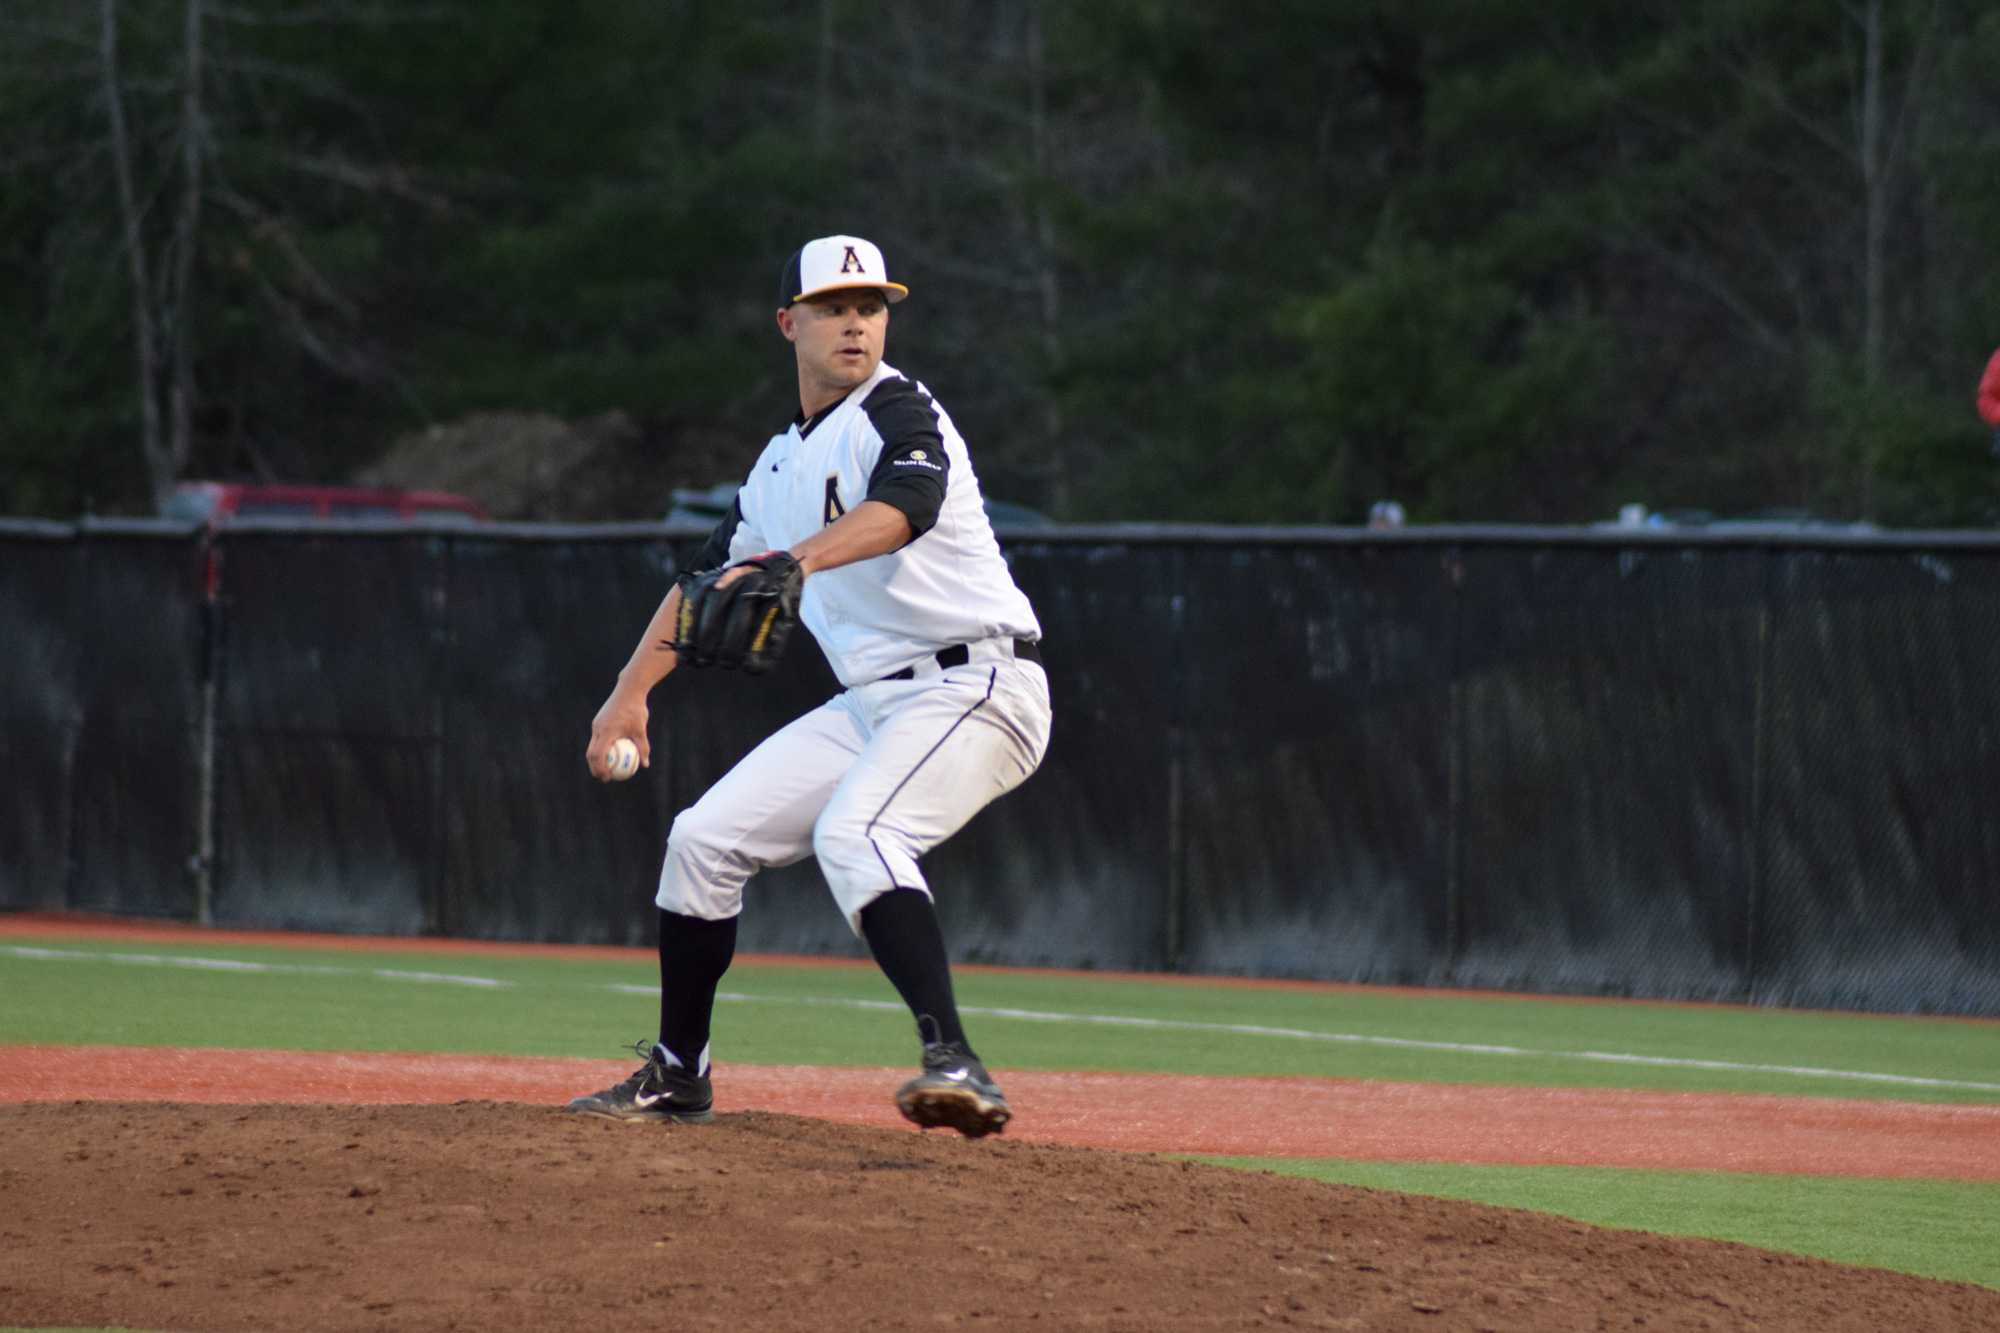 Junior Matt Brill pitches the ball during a home game against Wake Forest on March 28